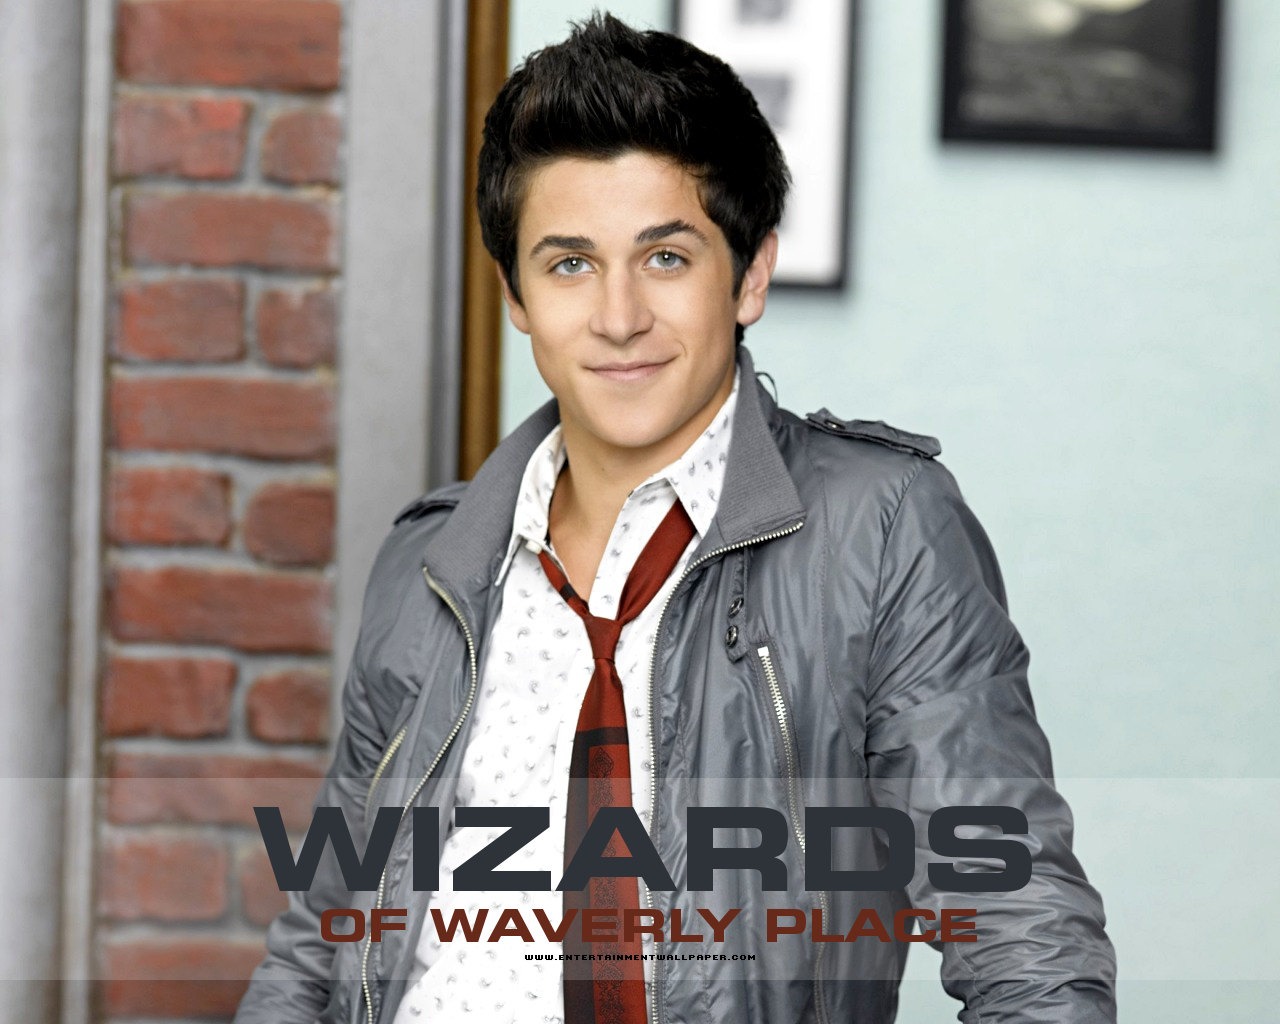 Wizards of Waverly Place wallpaper #12 - 1280x1024